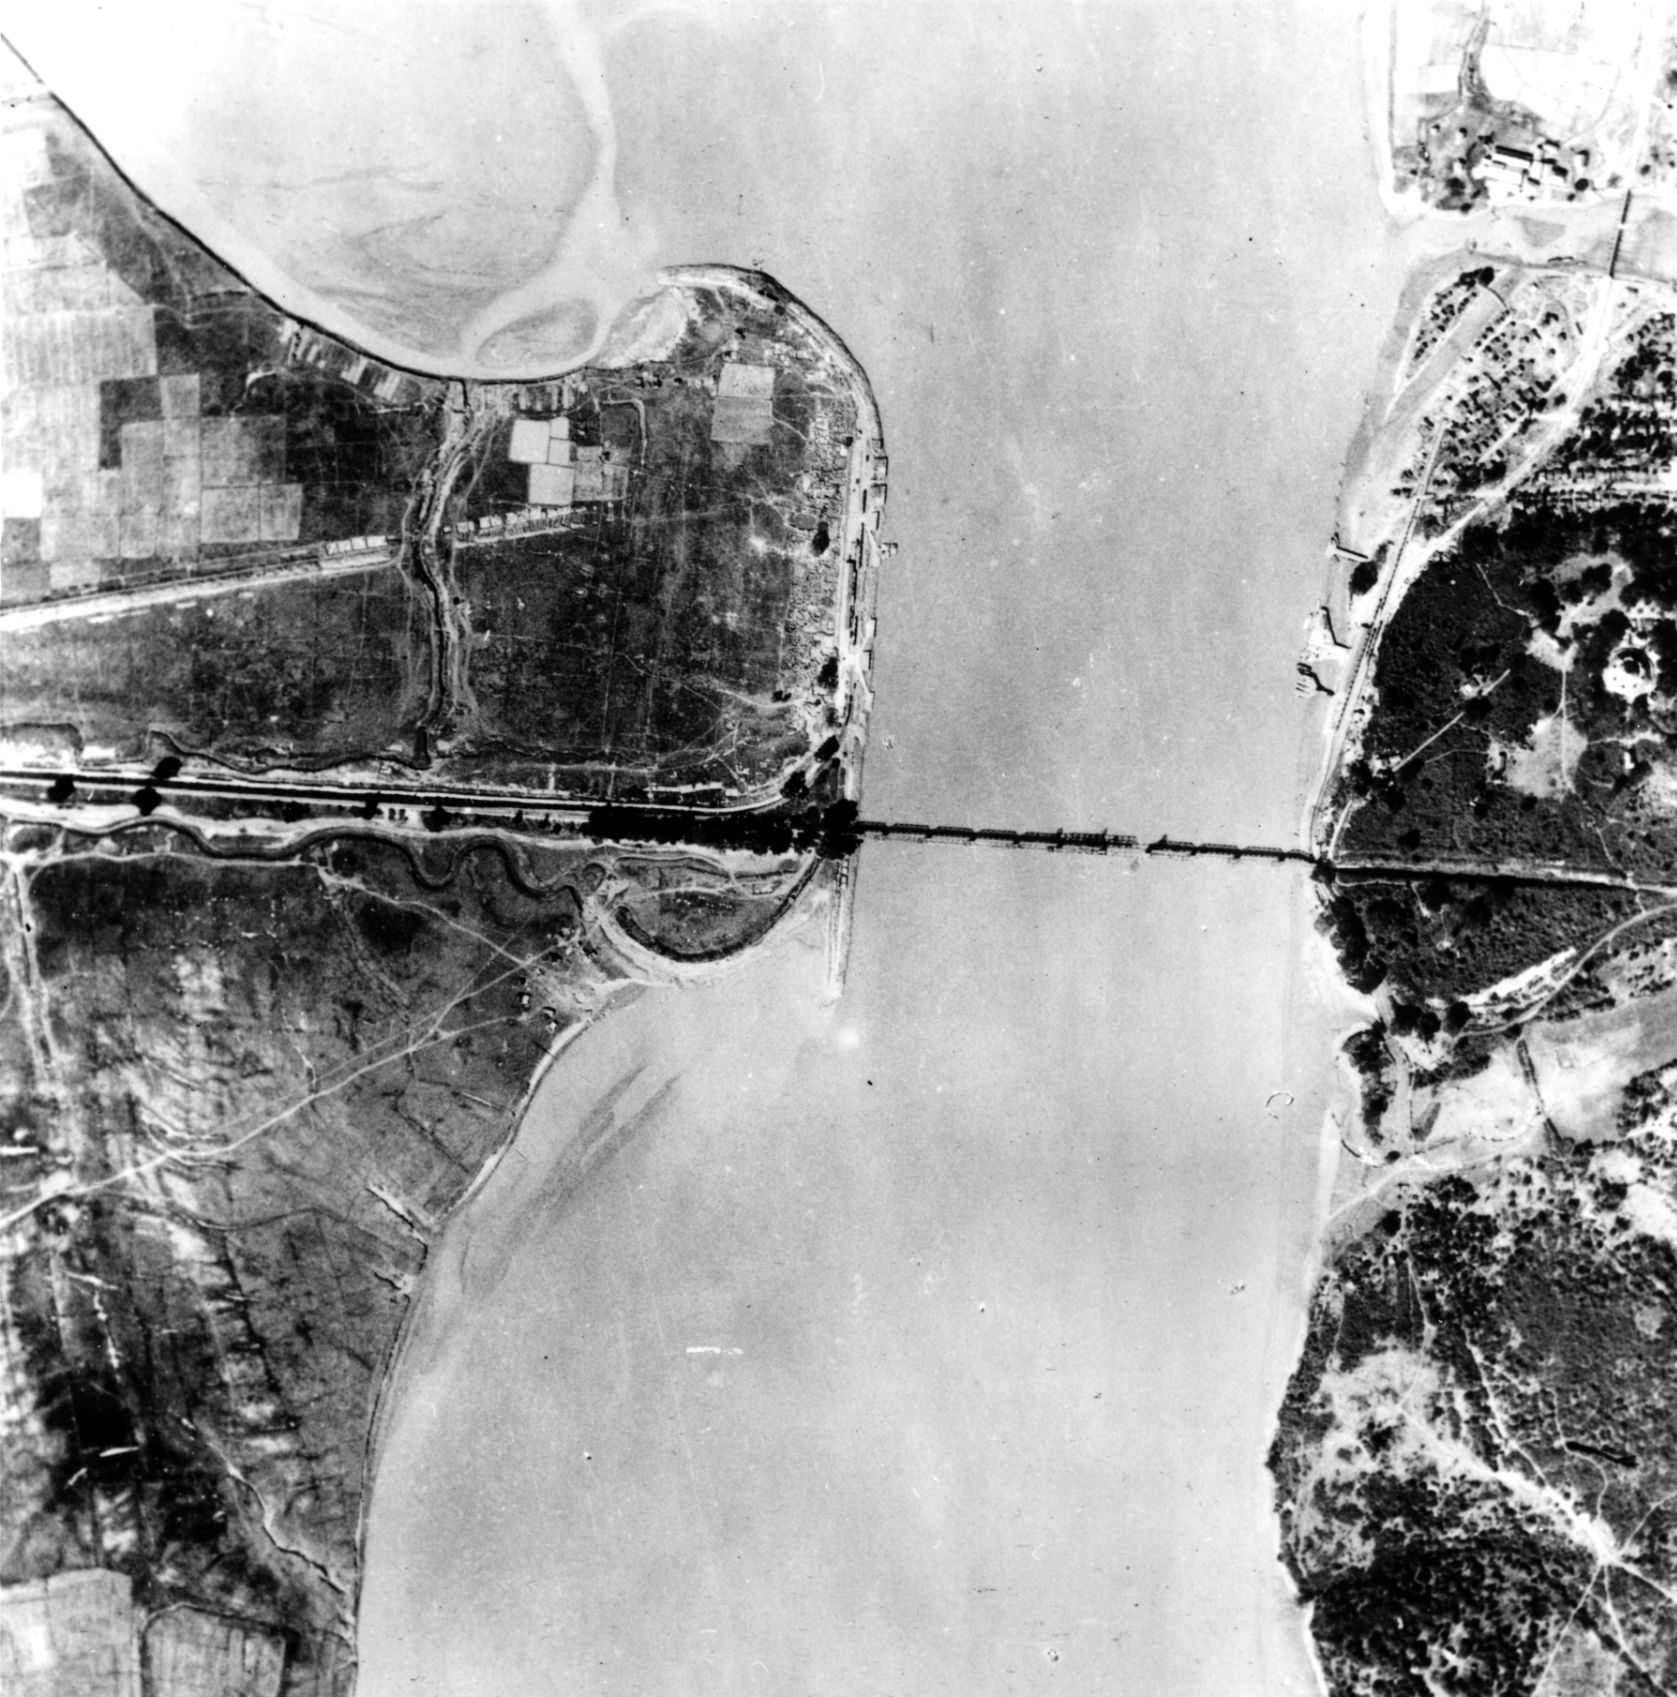 An aerial view of the railroad bridge across the Sittang River conveys a sense of the stream’s breadth, which challenged the Commonwealth forces during their withdrawal.